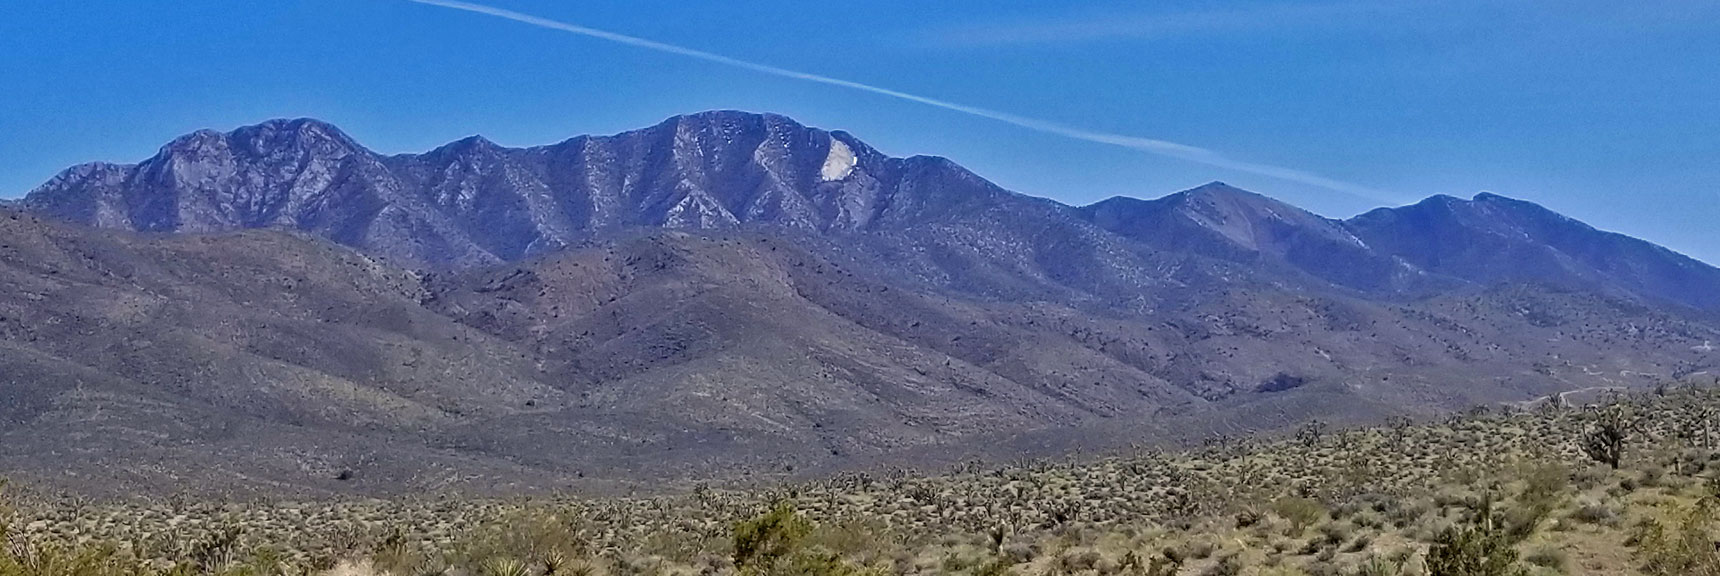 La Madre Mt with Devil's Slide Viewed from My Starting Point on Kyle Canyon and Harris Springs Rd, Nevada